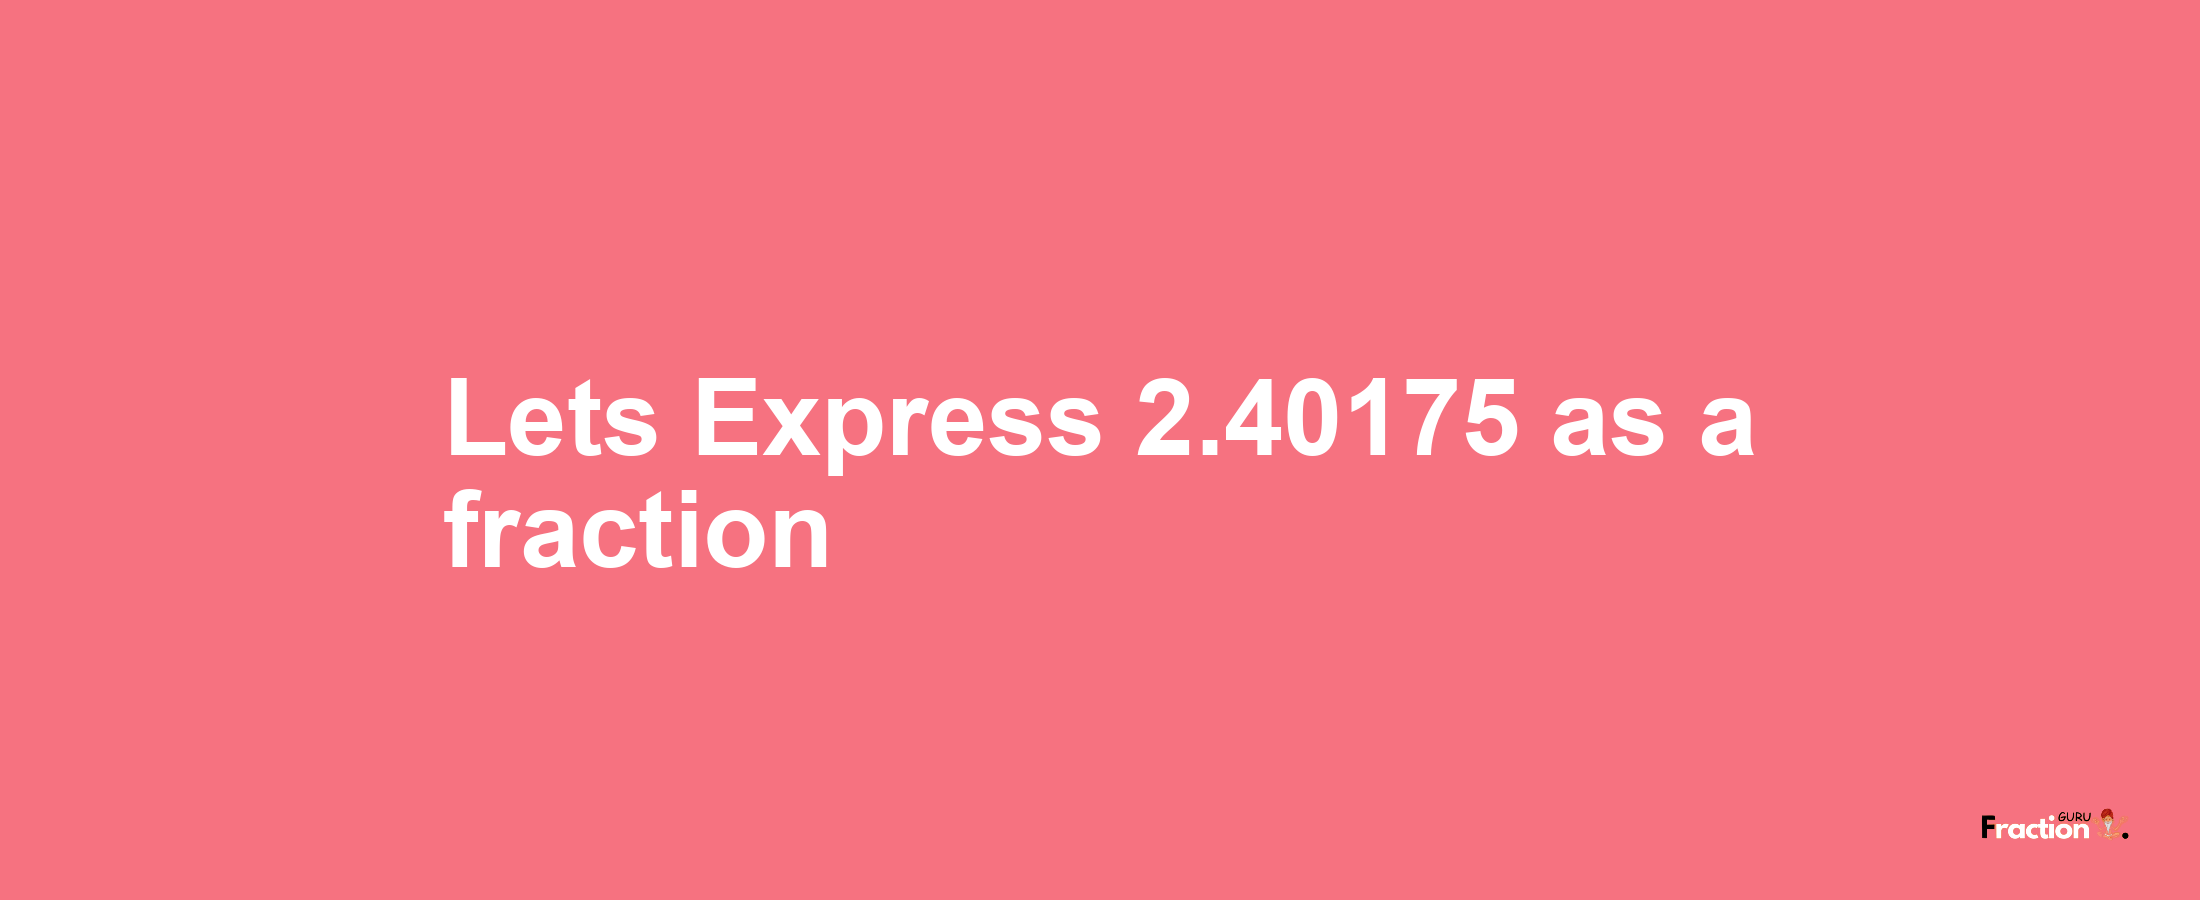 Lets Express 2.40175 as afraction